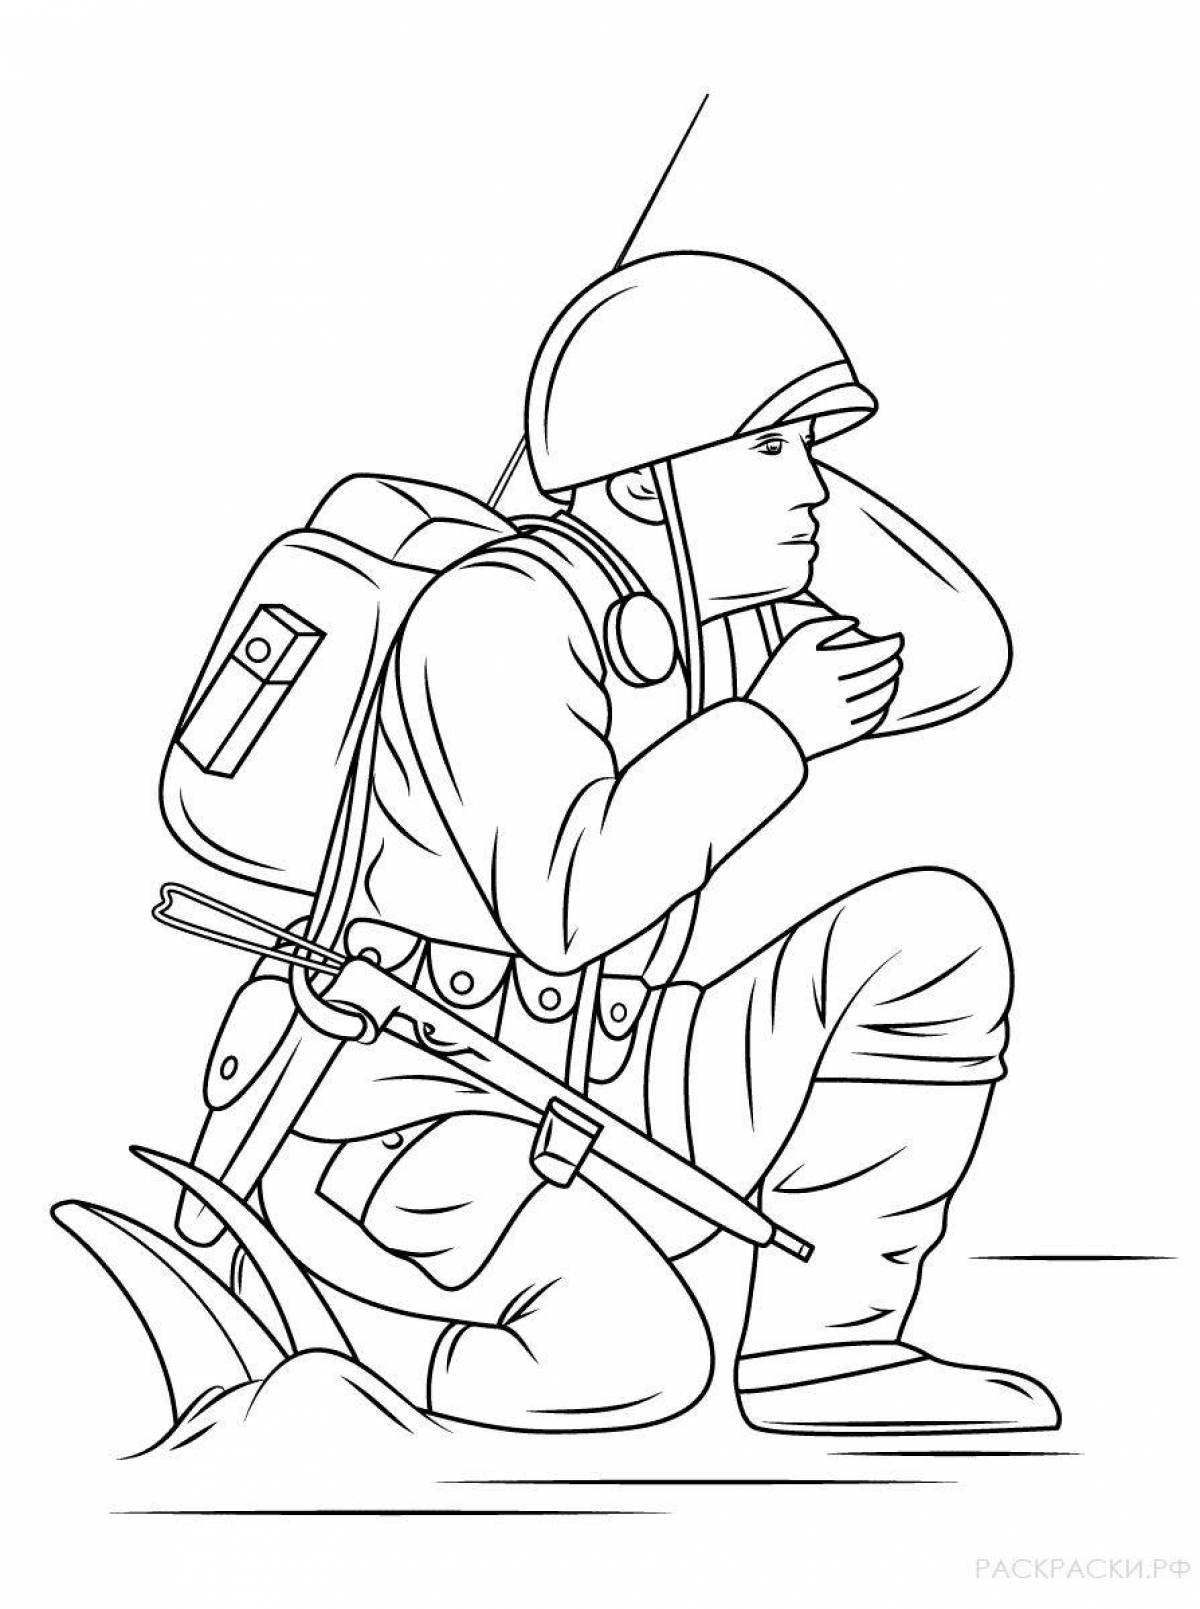 Coloring page blooming defender of the fatherland